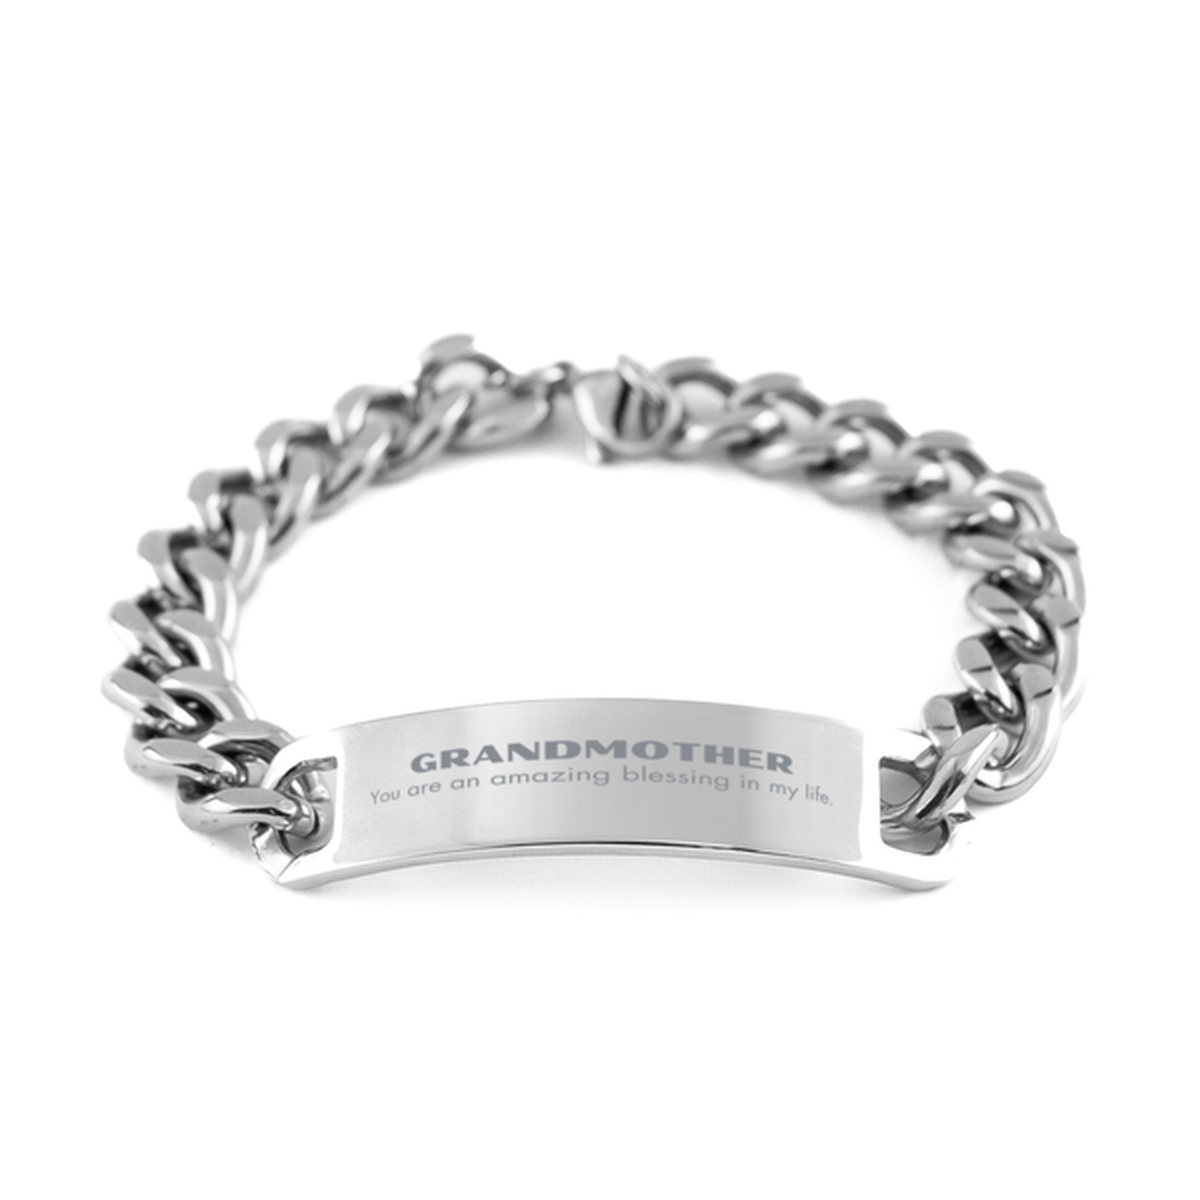 Grandmother Cuban Chain Stainless Steel Bracelet, You are an amazing blessing in my life, Thank You Gifts For Grandmother, Inspirational Birthday Christmas Unique Gifts For Grandmother